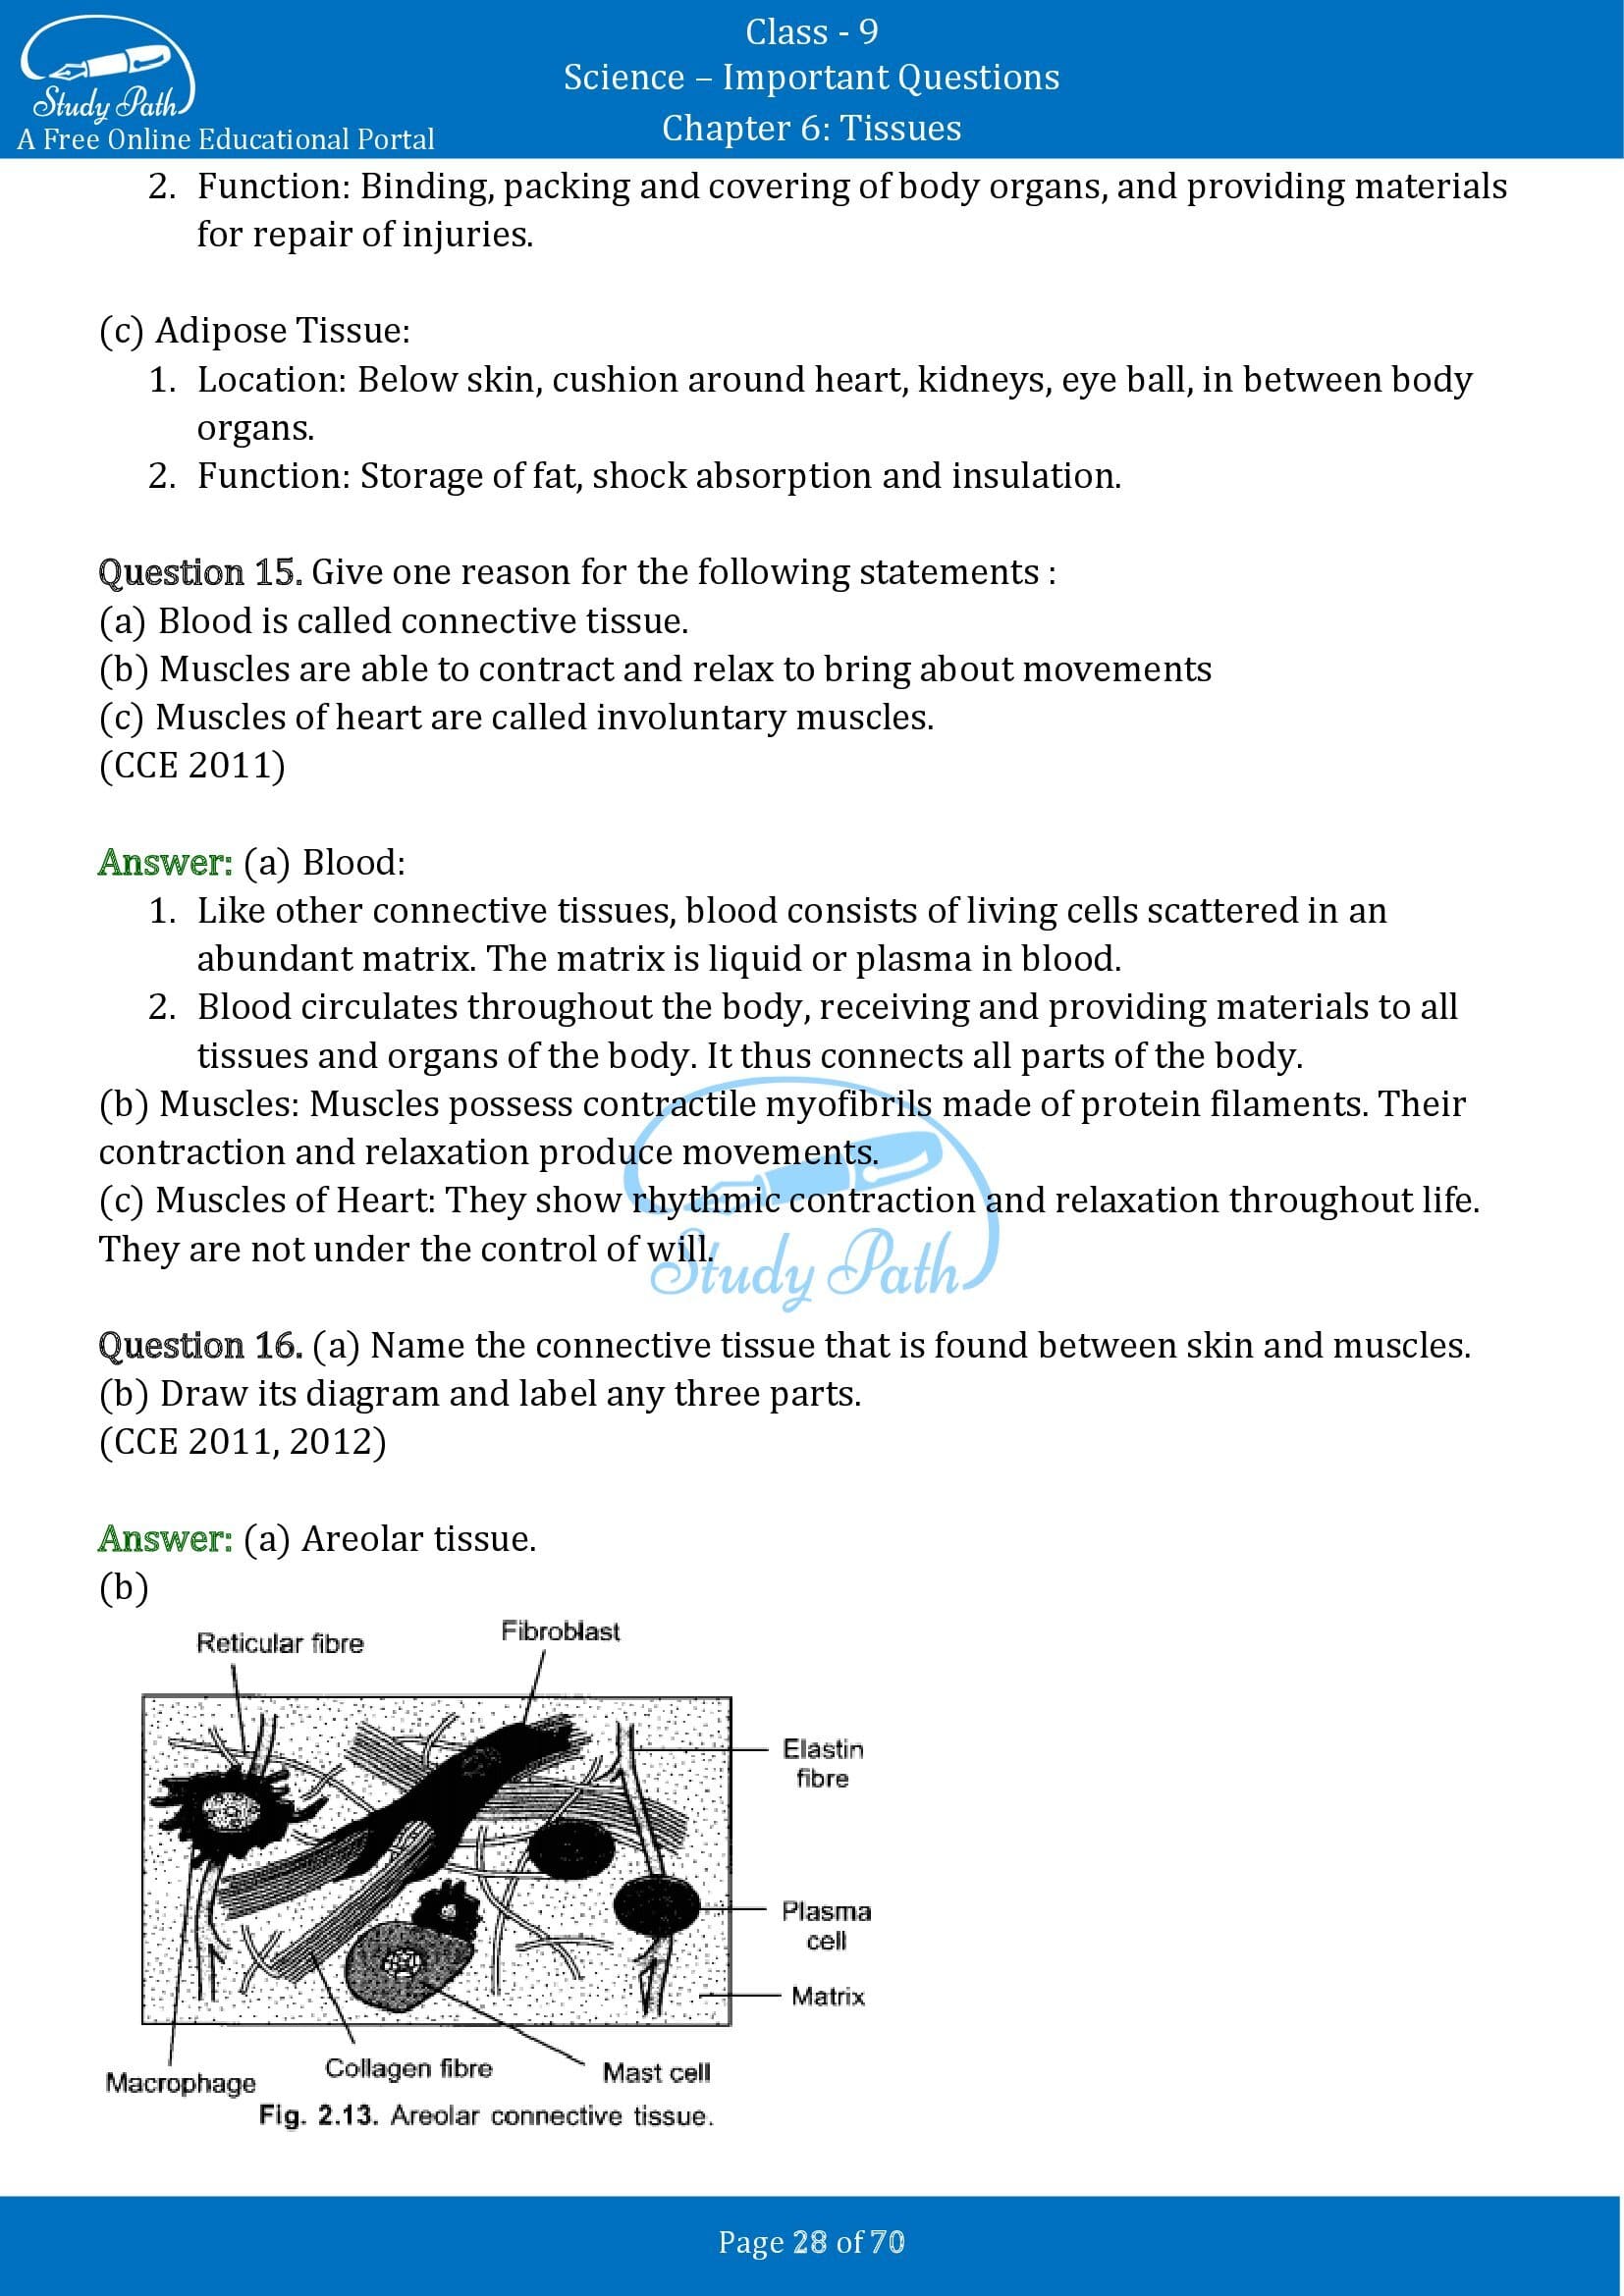 Important Questions for Class 9 Science Chapter 6 Tissues 00028